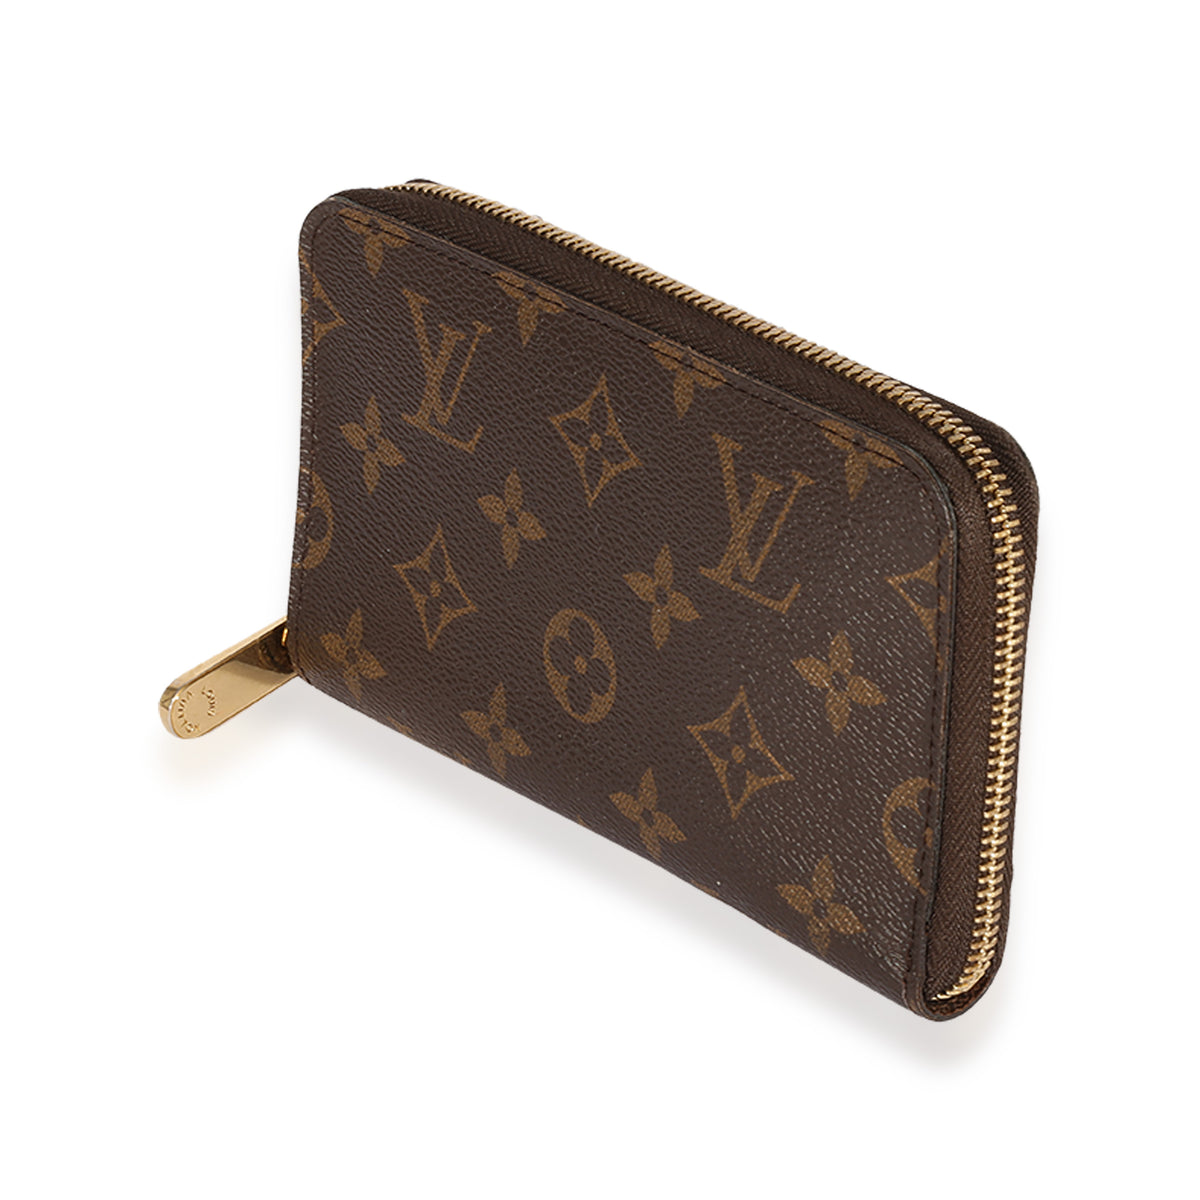 LV newest zippy compact wallet 2015 